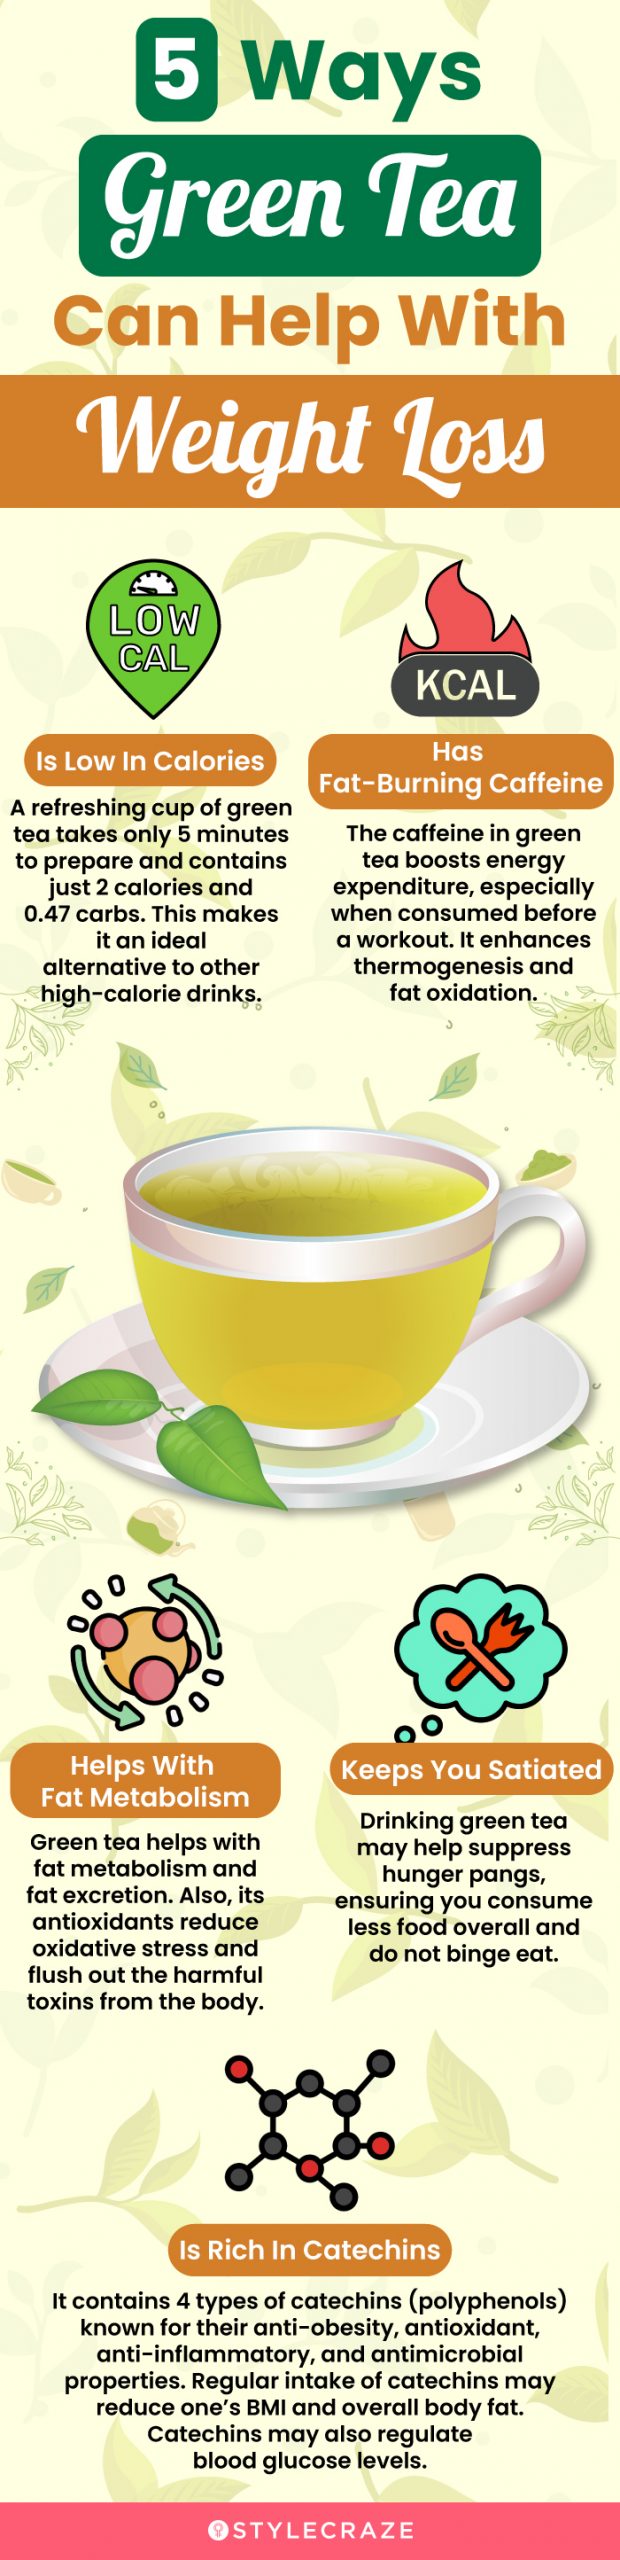 5 ways green tea can help with weight loss (infographic)